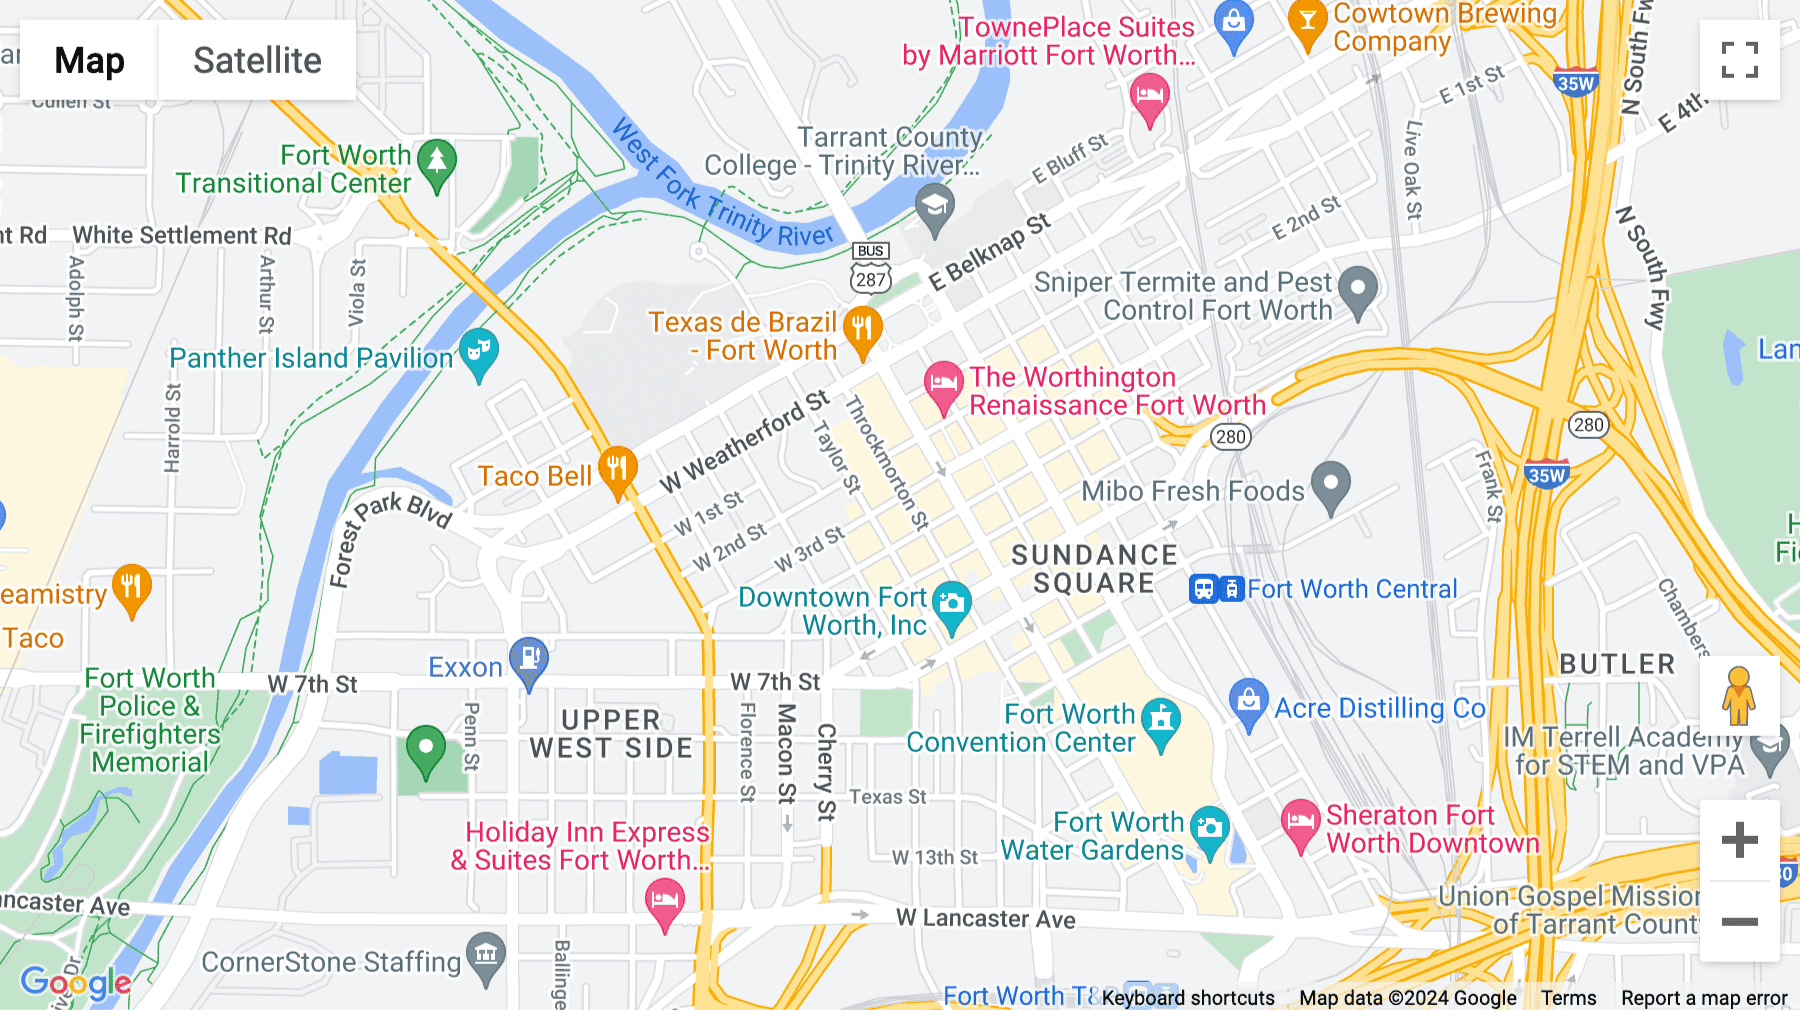 Click for interative map of 420 Throckmorton Street, Suite 200, Downtown Sundance Square, Fort Worth